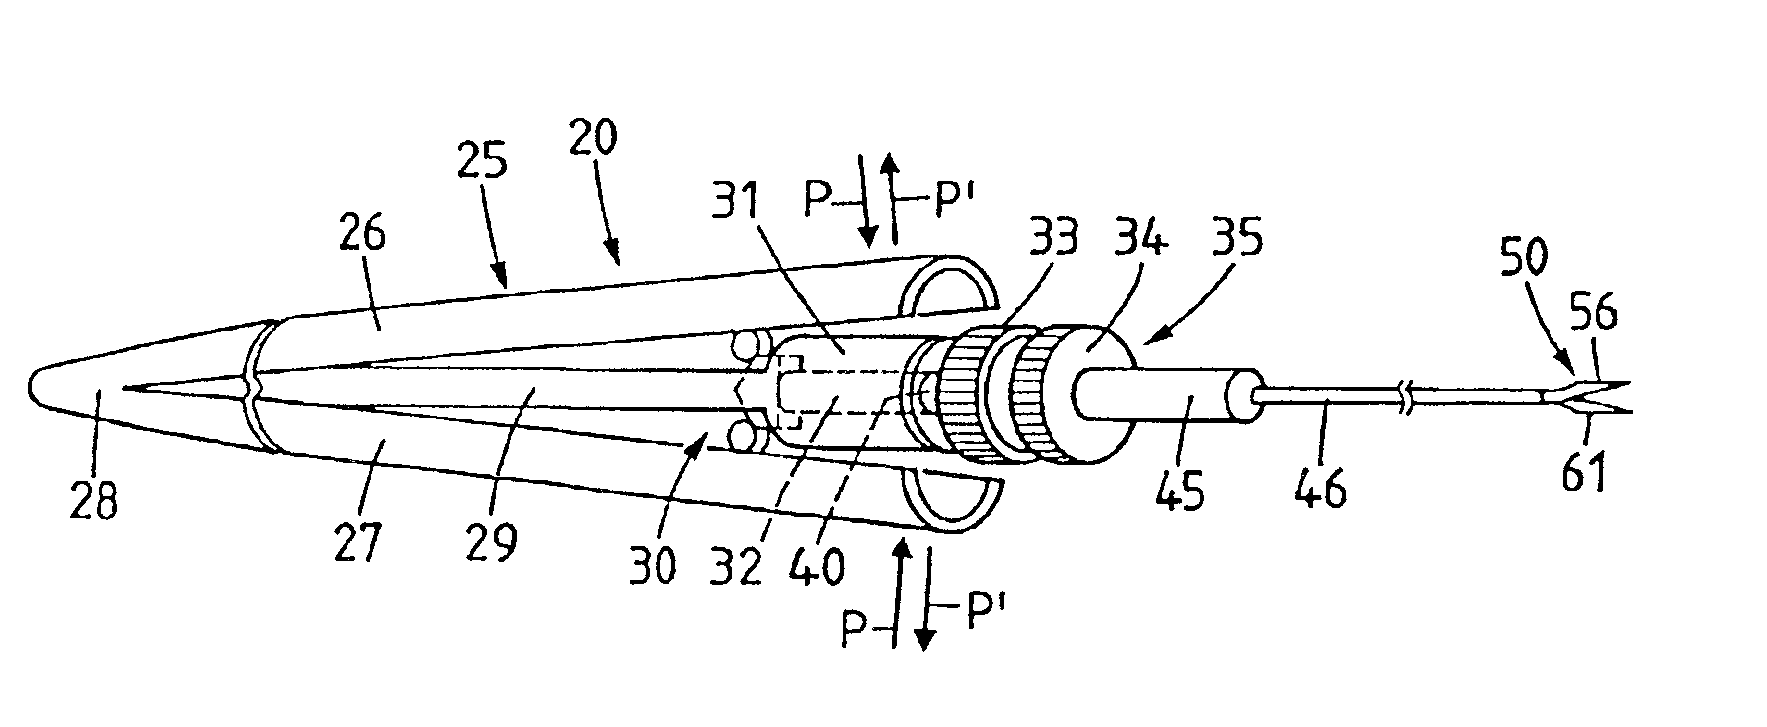 Micro surgical cutting instrument configured as scissors